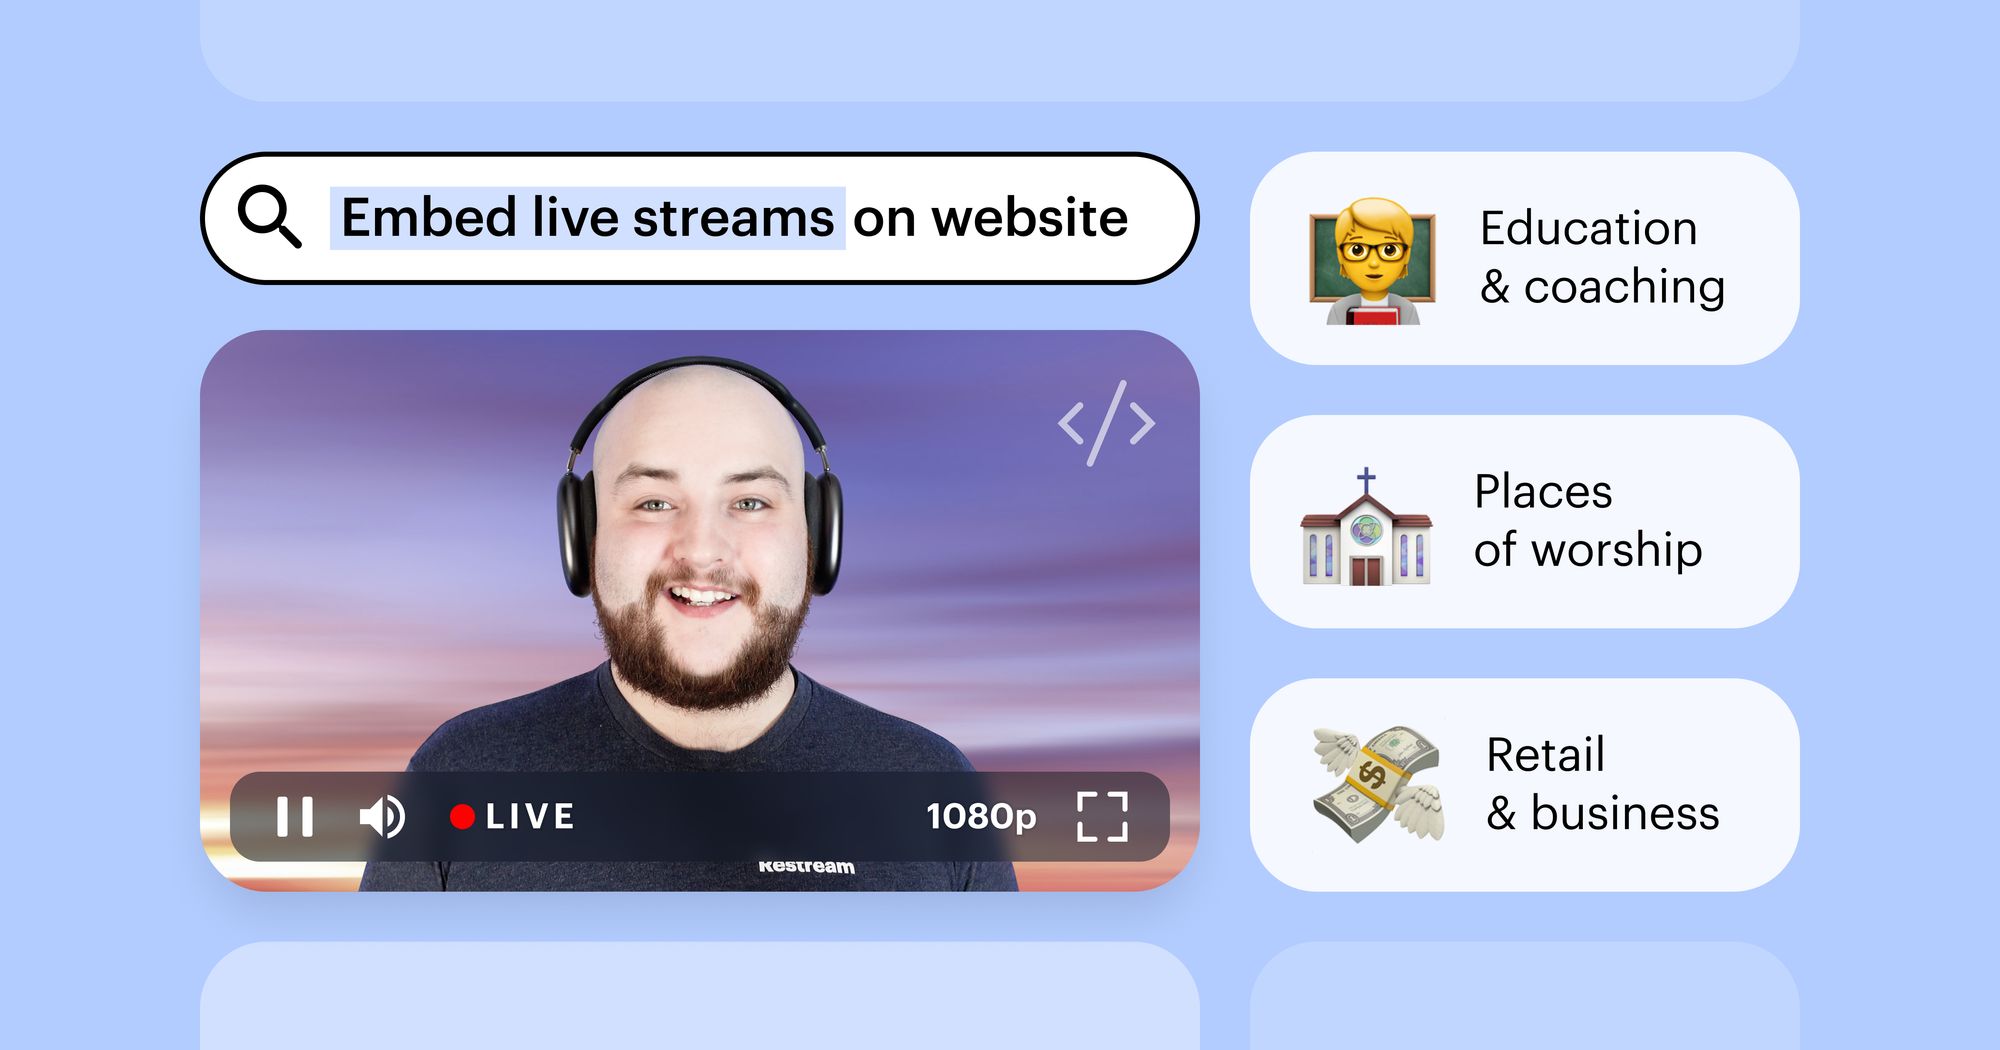 6 scenarios for live streaming to your own website